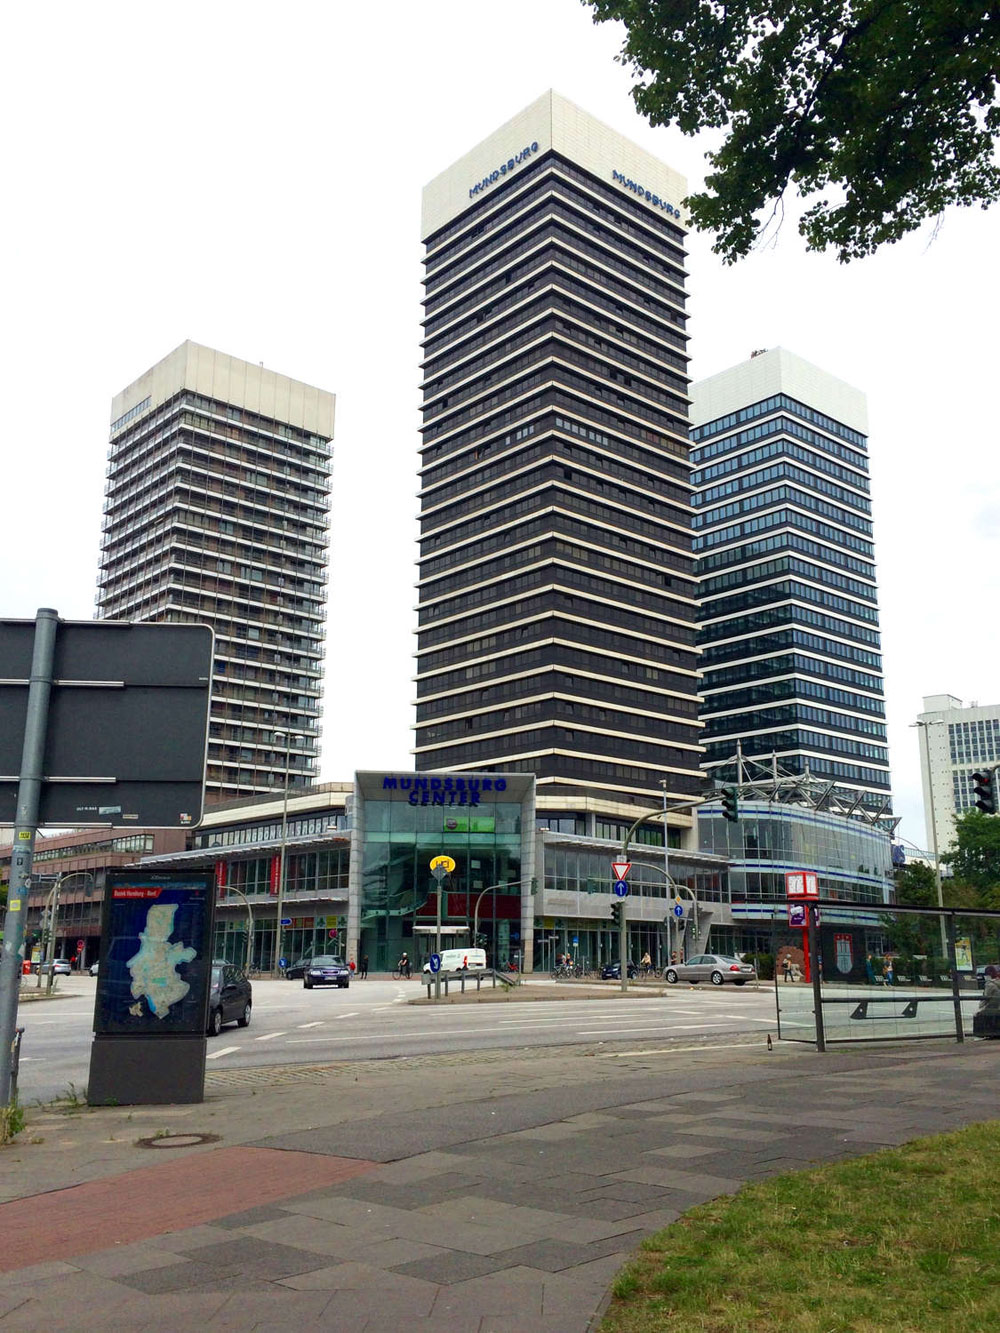 The three skyscrapers of the Mundsburg Center